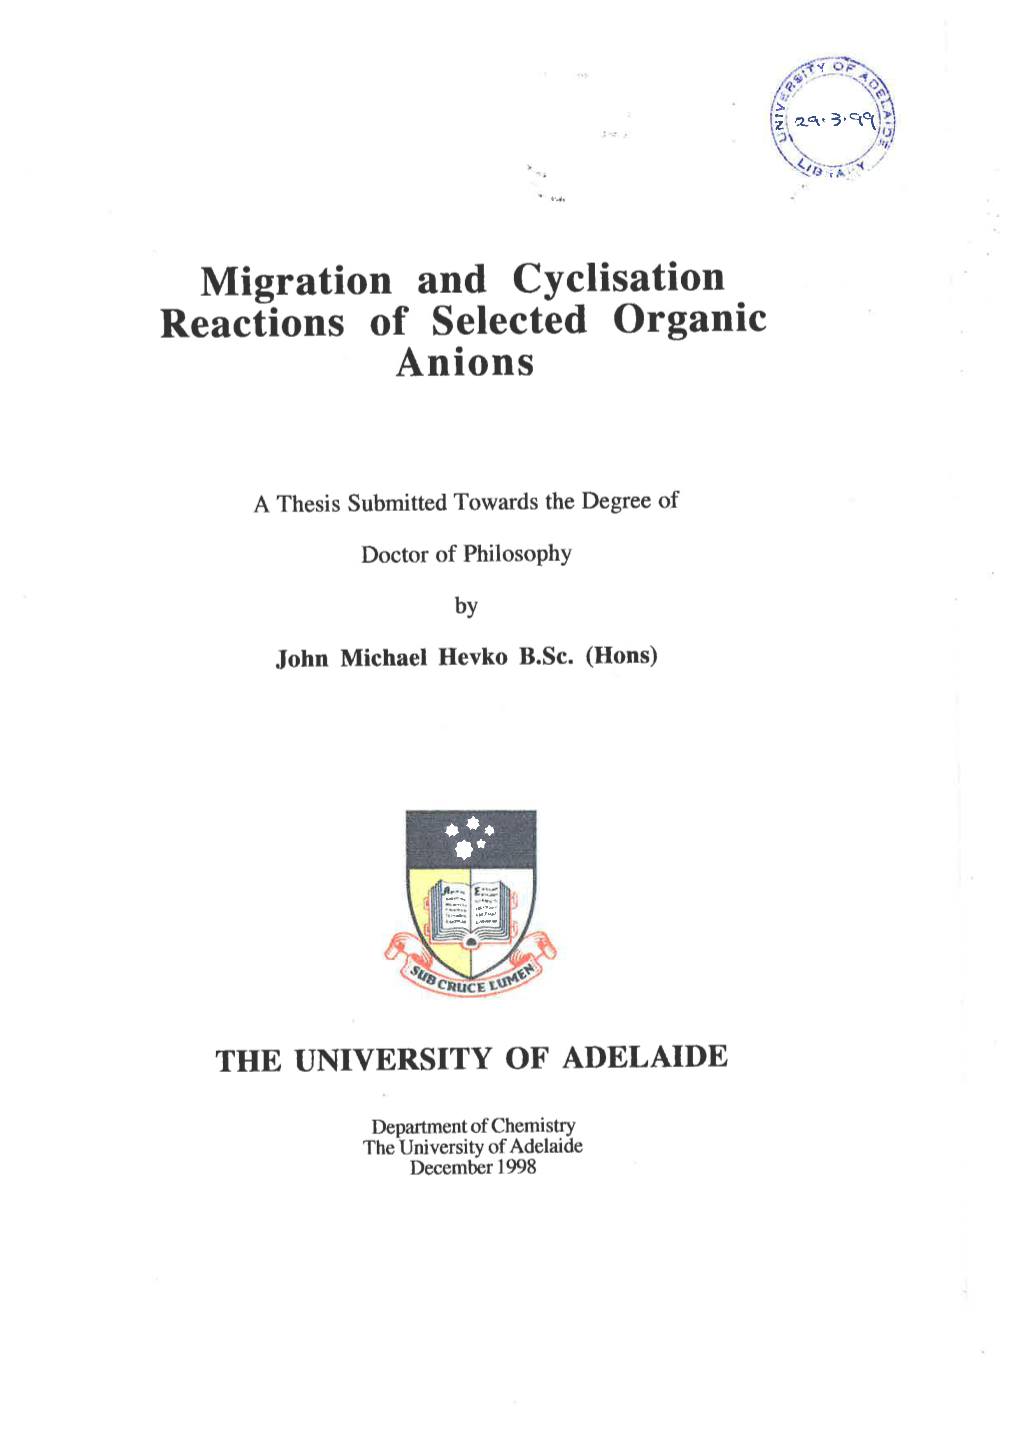 Migration and Cyclisation Reactions of Selected Organic Anions